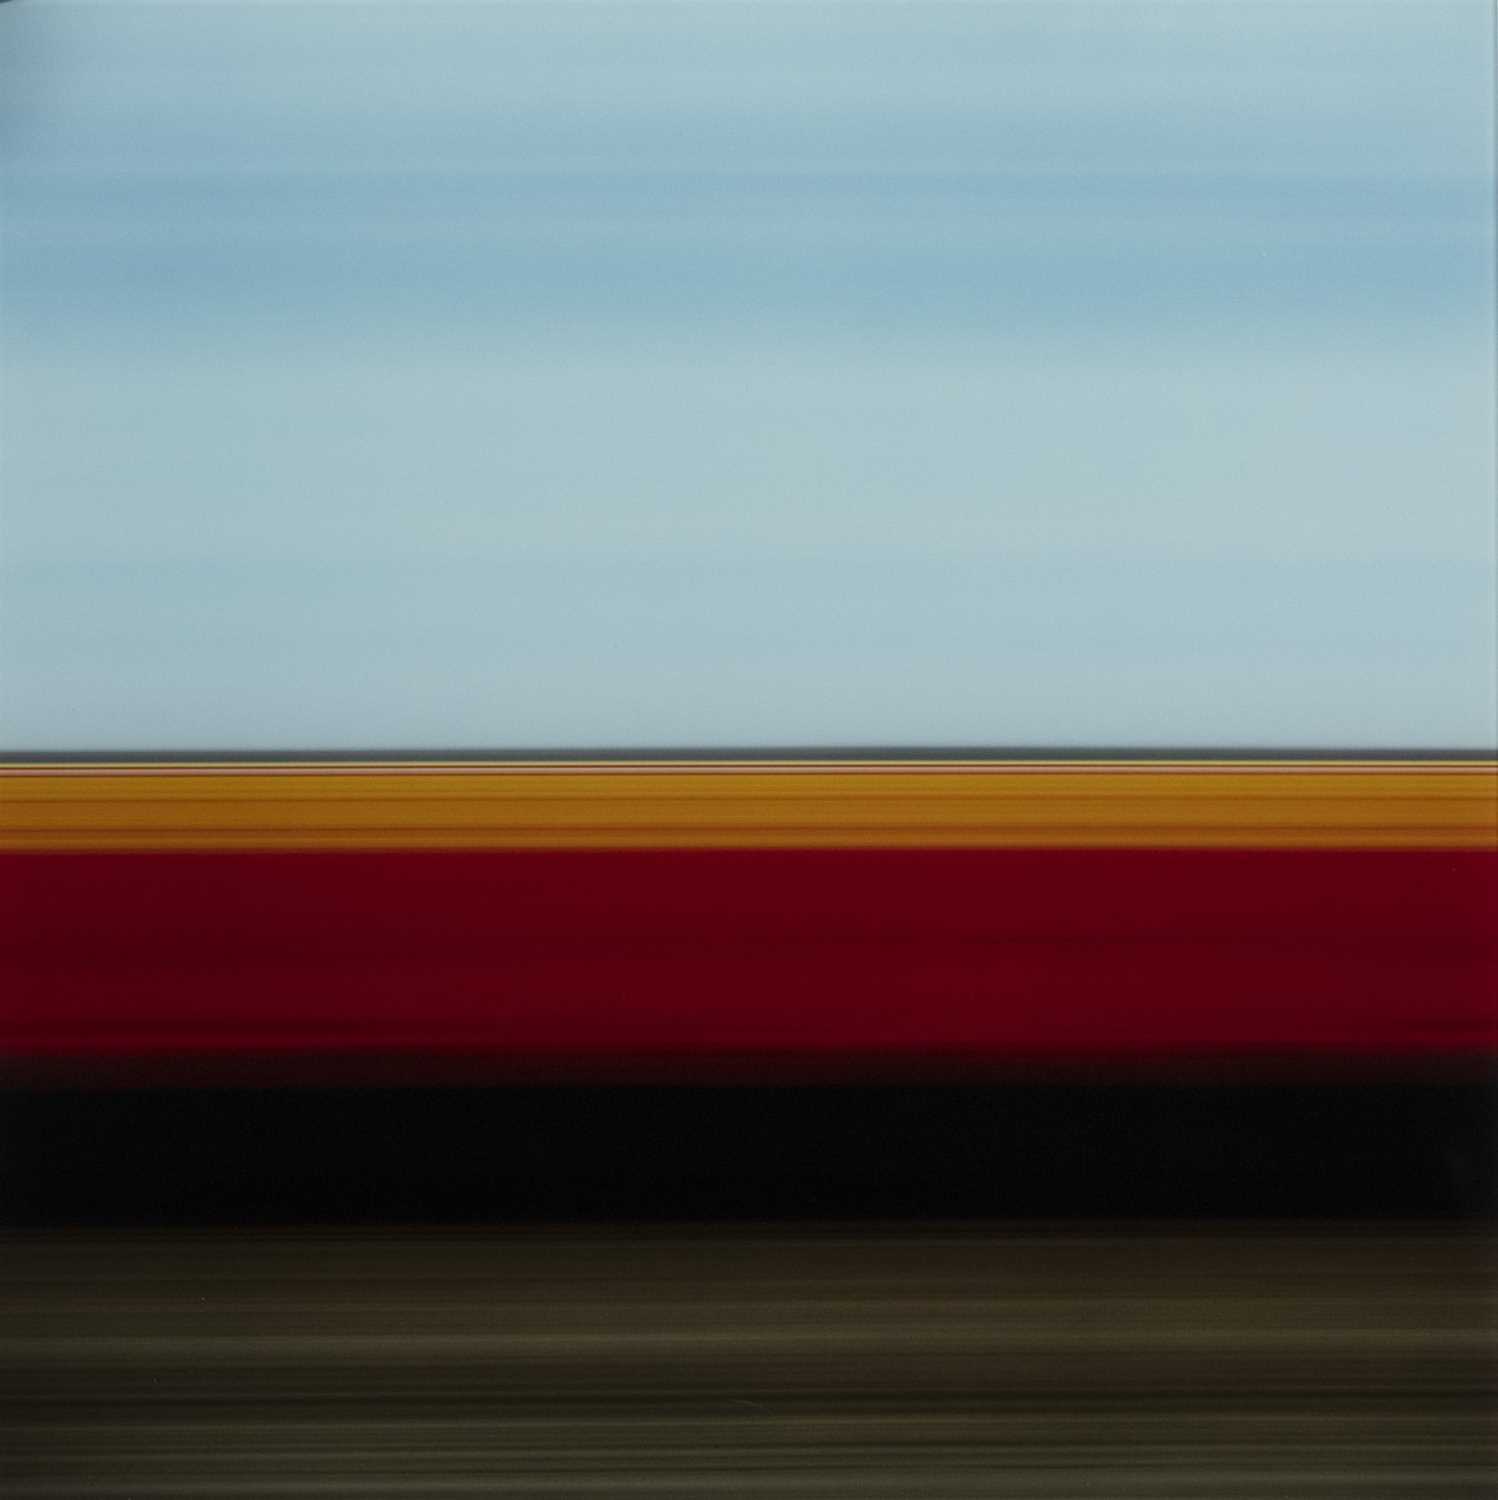 TRAVELLING STILL, TULIP FIELDS III, HOLLAND 2006, A PRINT BY ROB CARTER